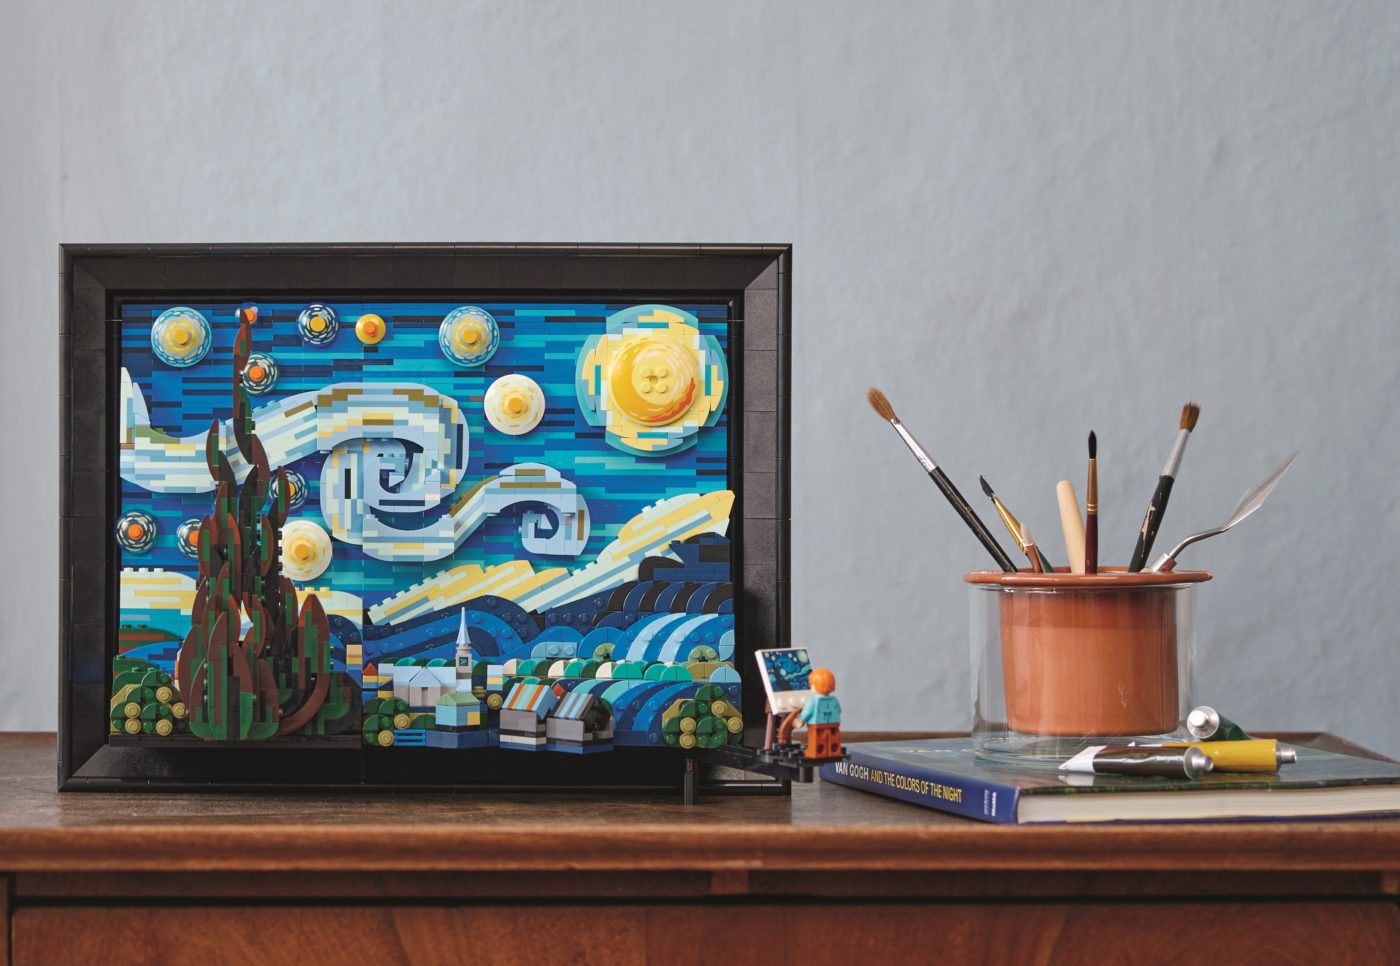 LEGO Ideas 21333 Starry Night officially unveiled - Build your own Van Gogh  LEGO masterpiece! - Jay's Brick Blog